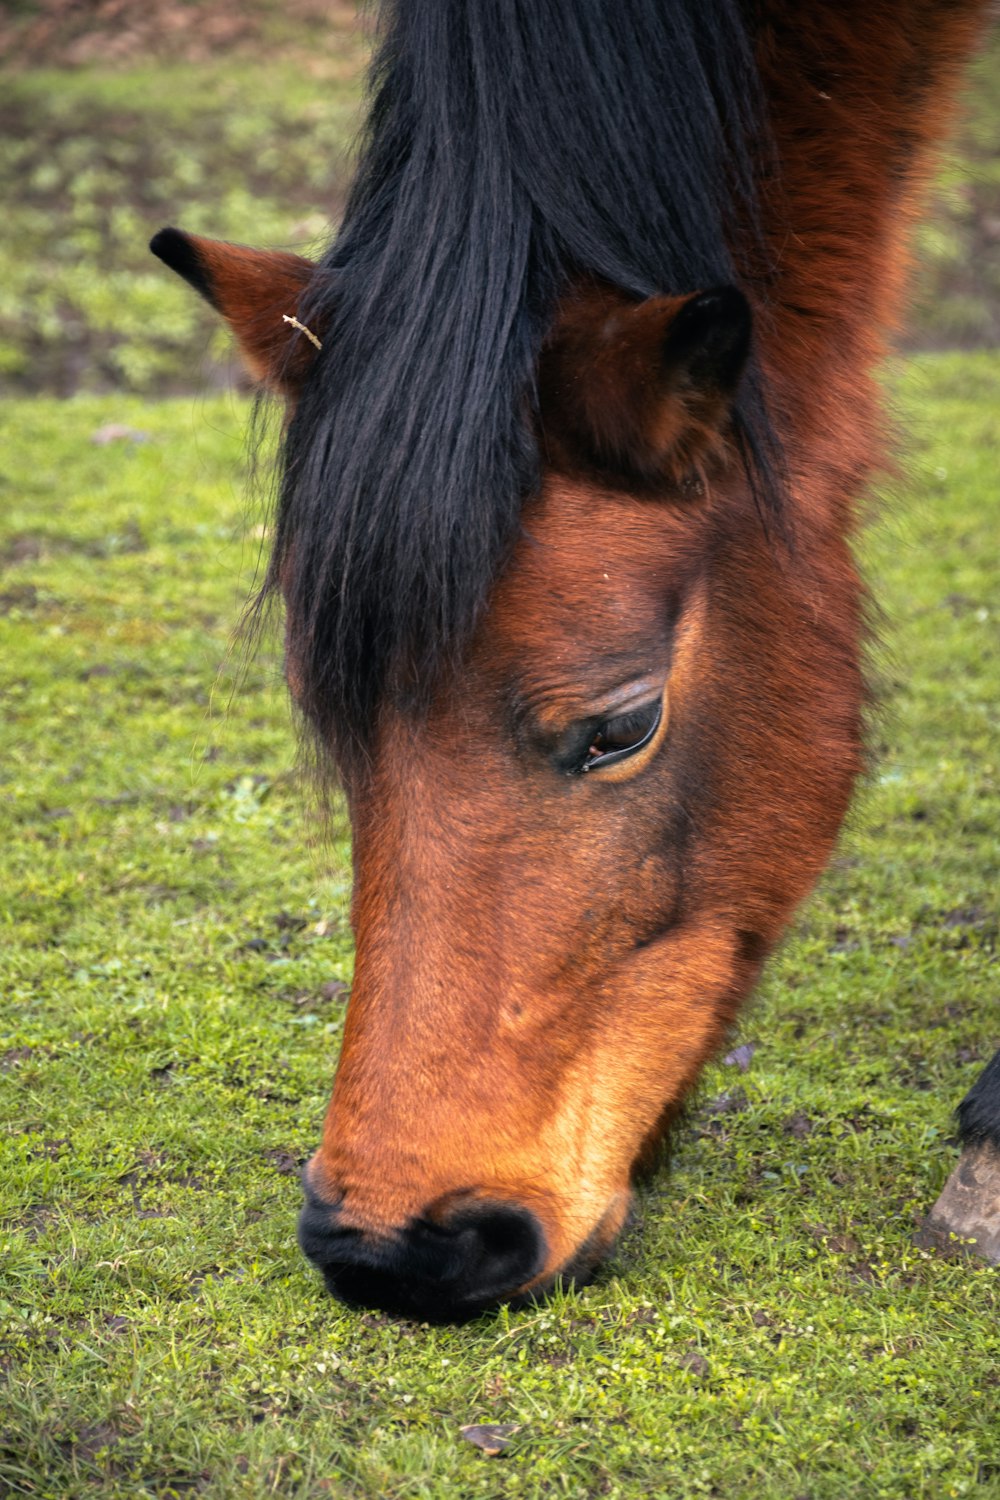 a close up of a horse grazing on grass